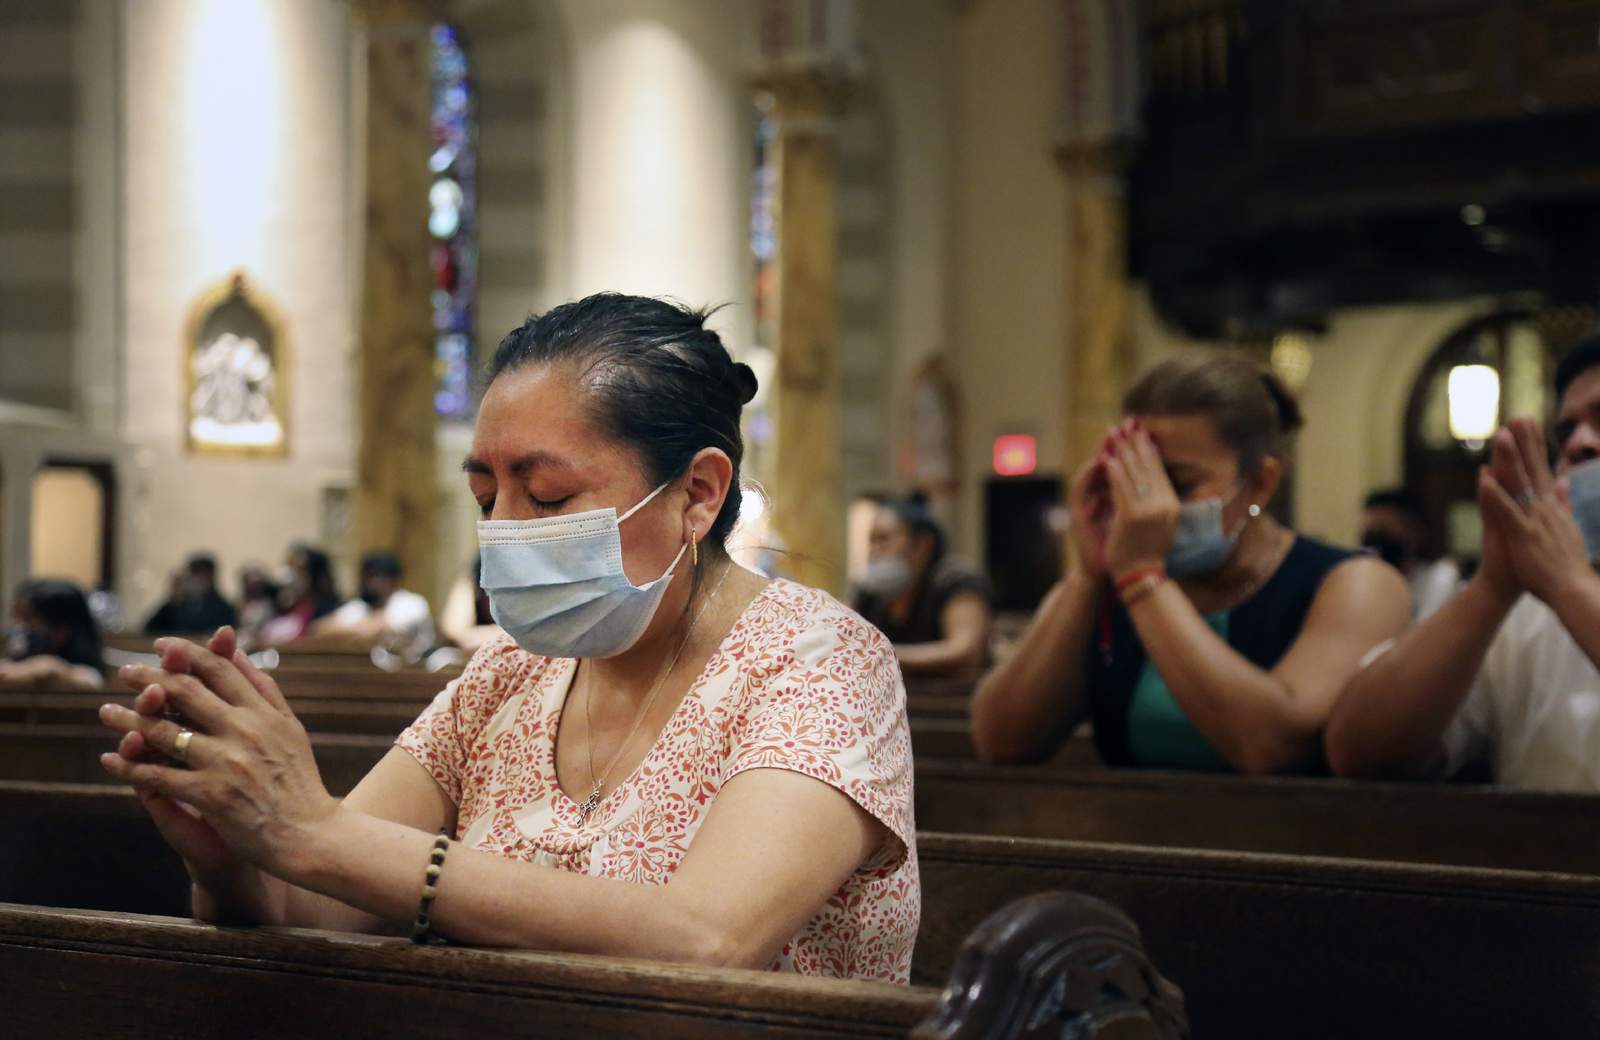 Catholics in Upper Peninsula required to wear masks at Mass